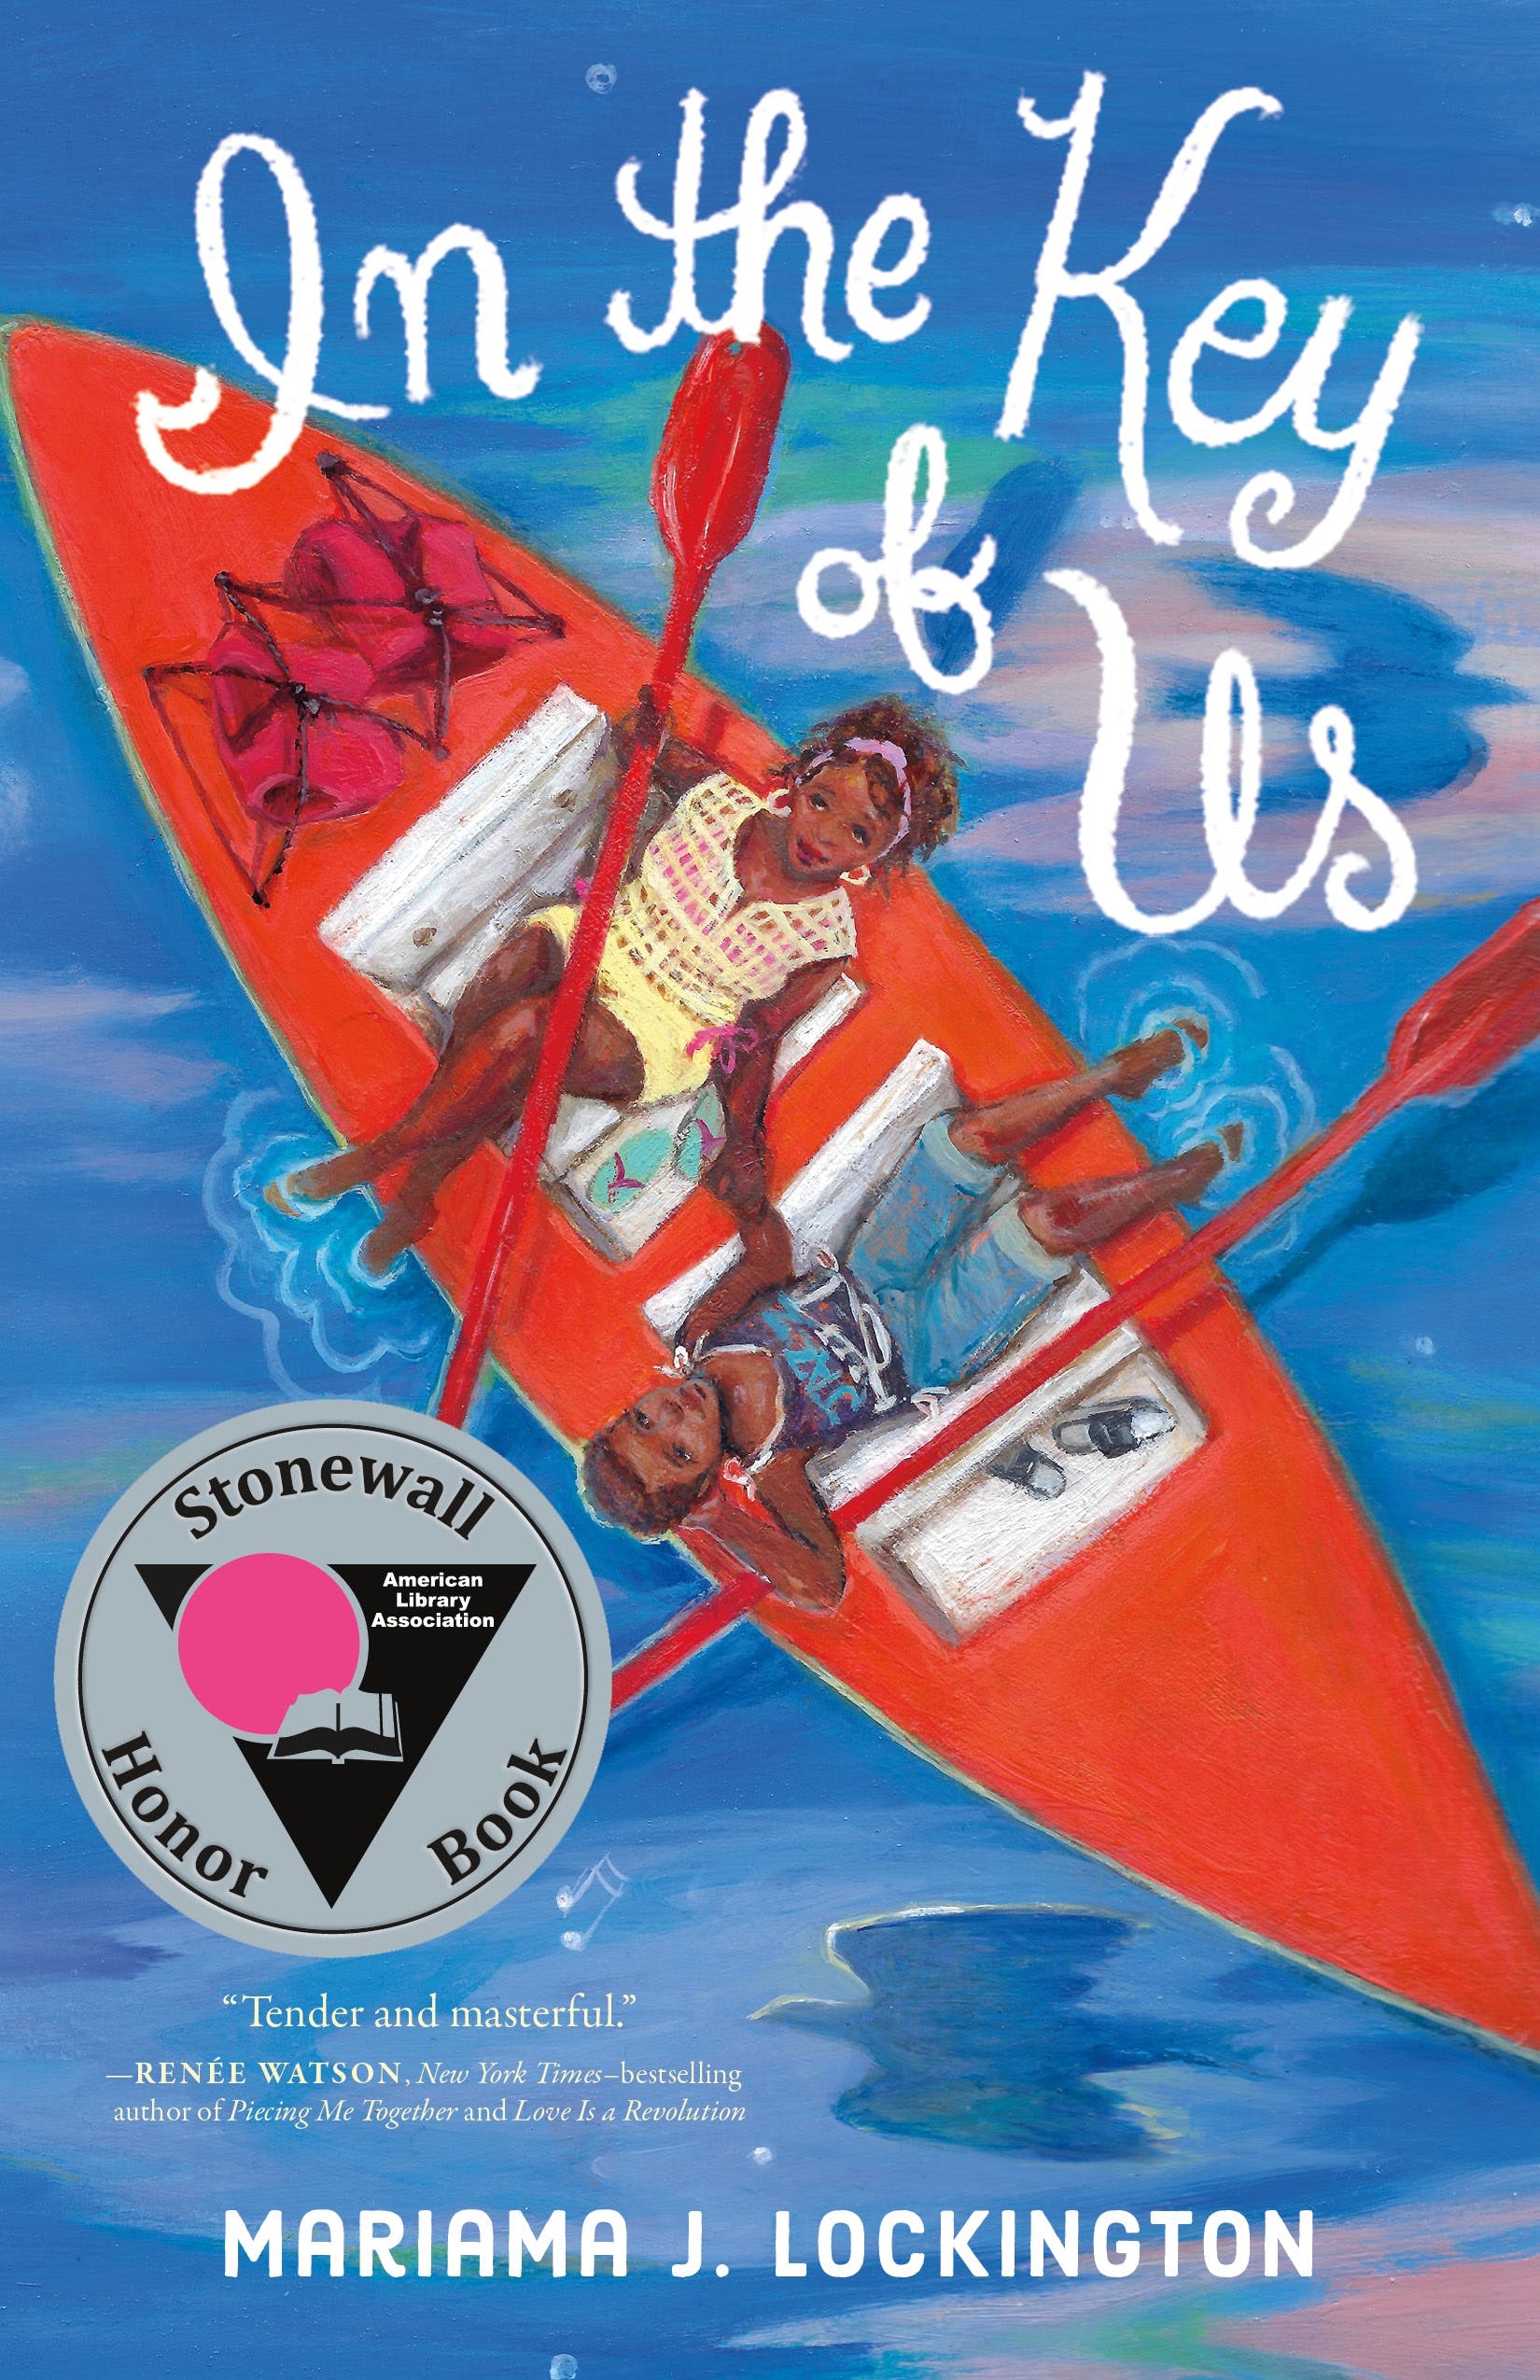 middle school books - In The Key of Us by Mariama J Lockington